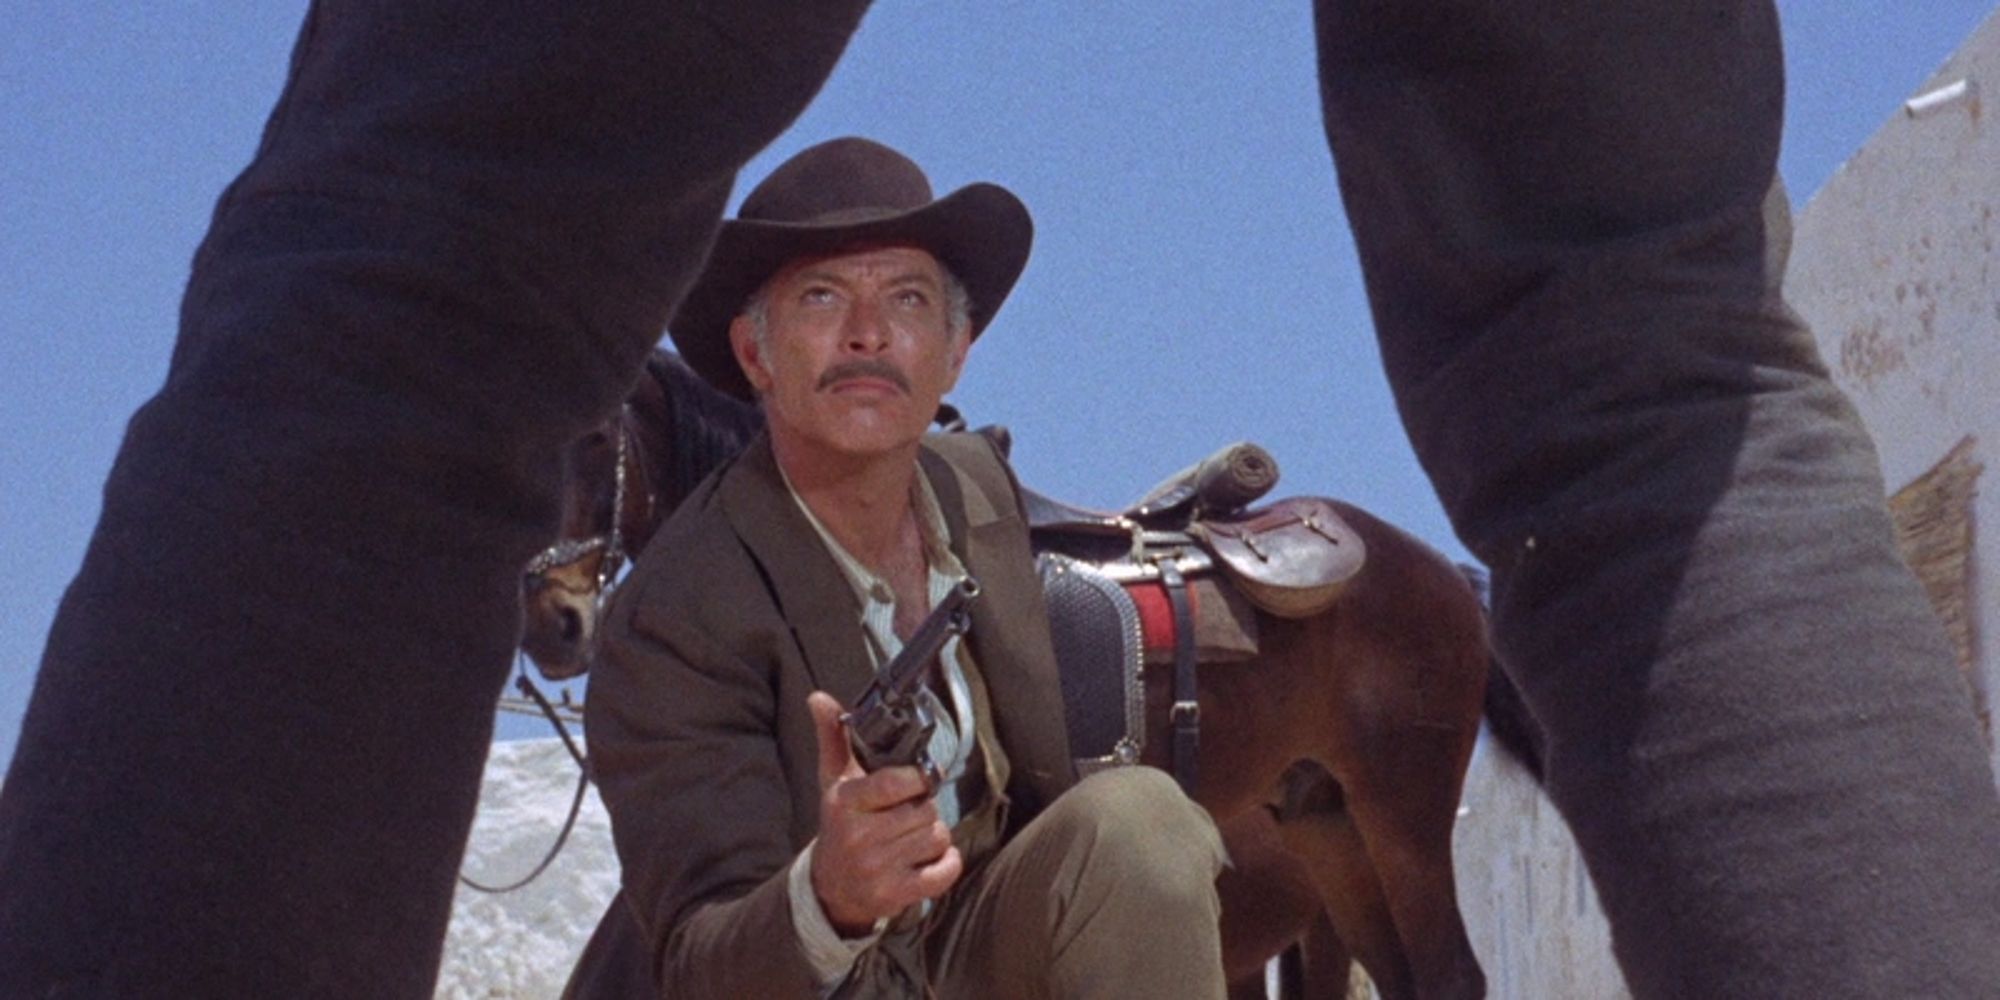 Lee Van Cleef crouches on the ground with a revolver before another man in Day of Anger